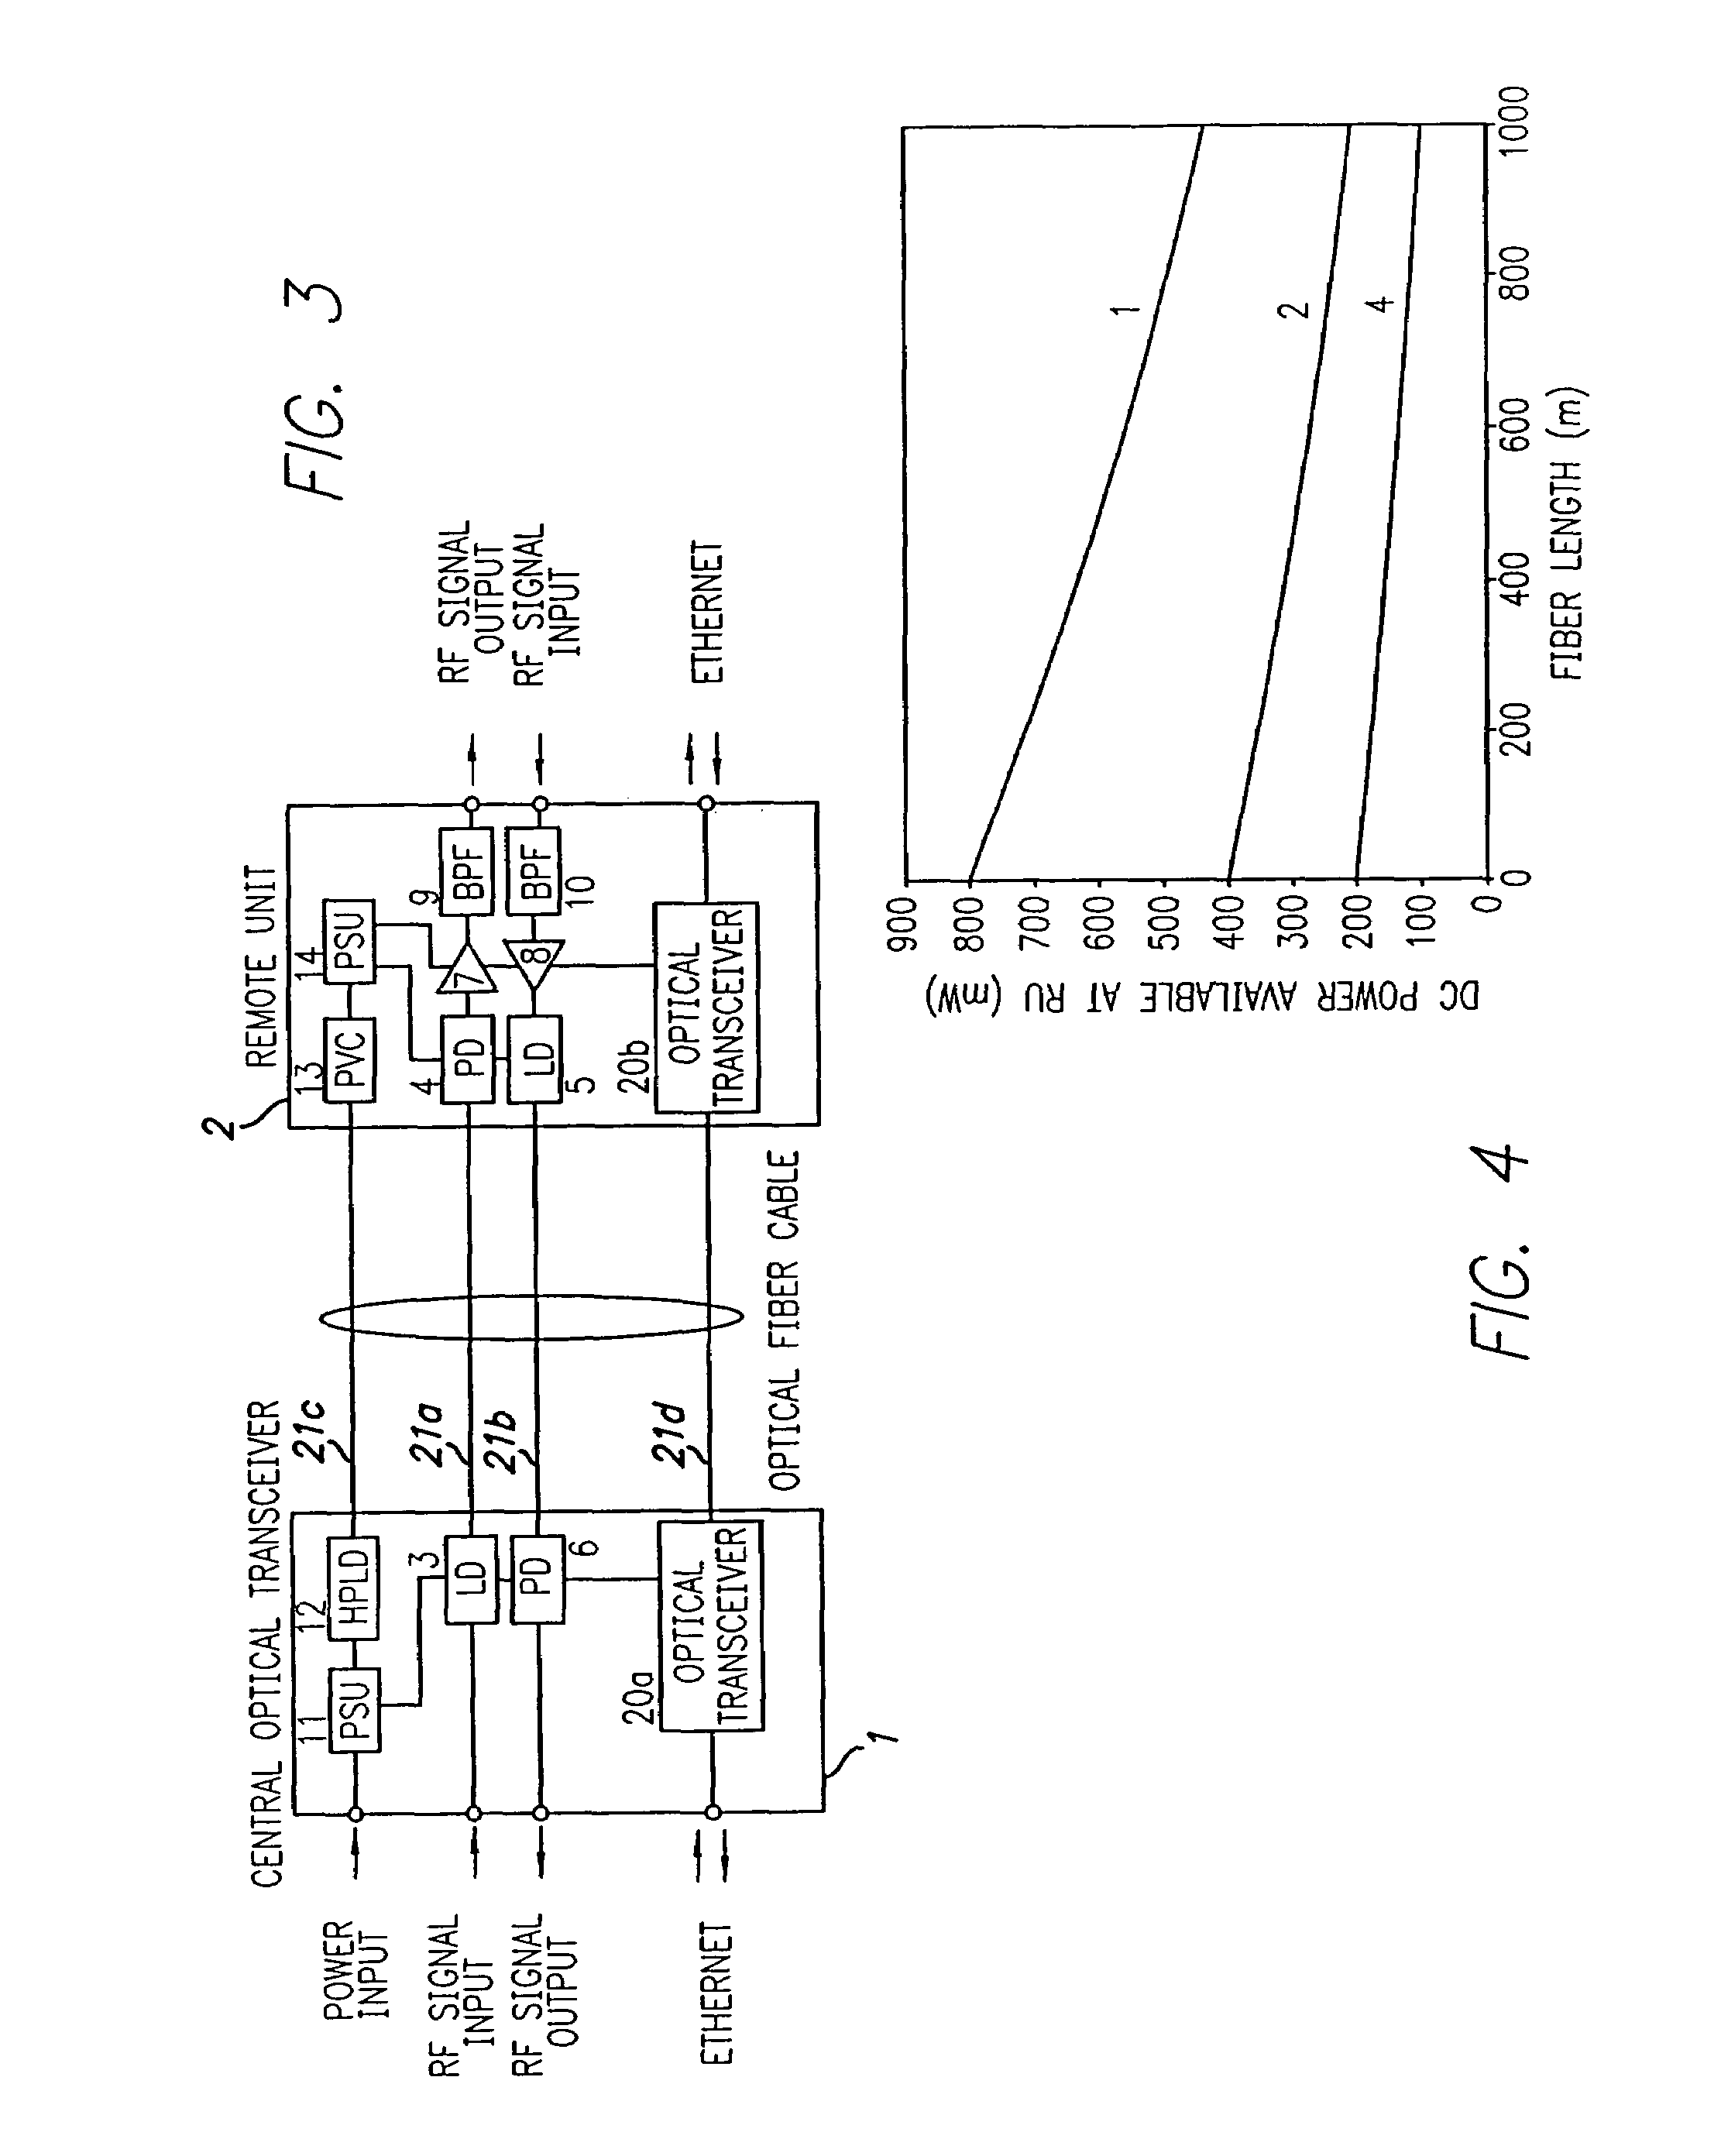 Optical fiber communications method and system without a remote electrical power supply